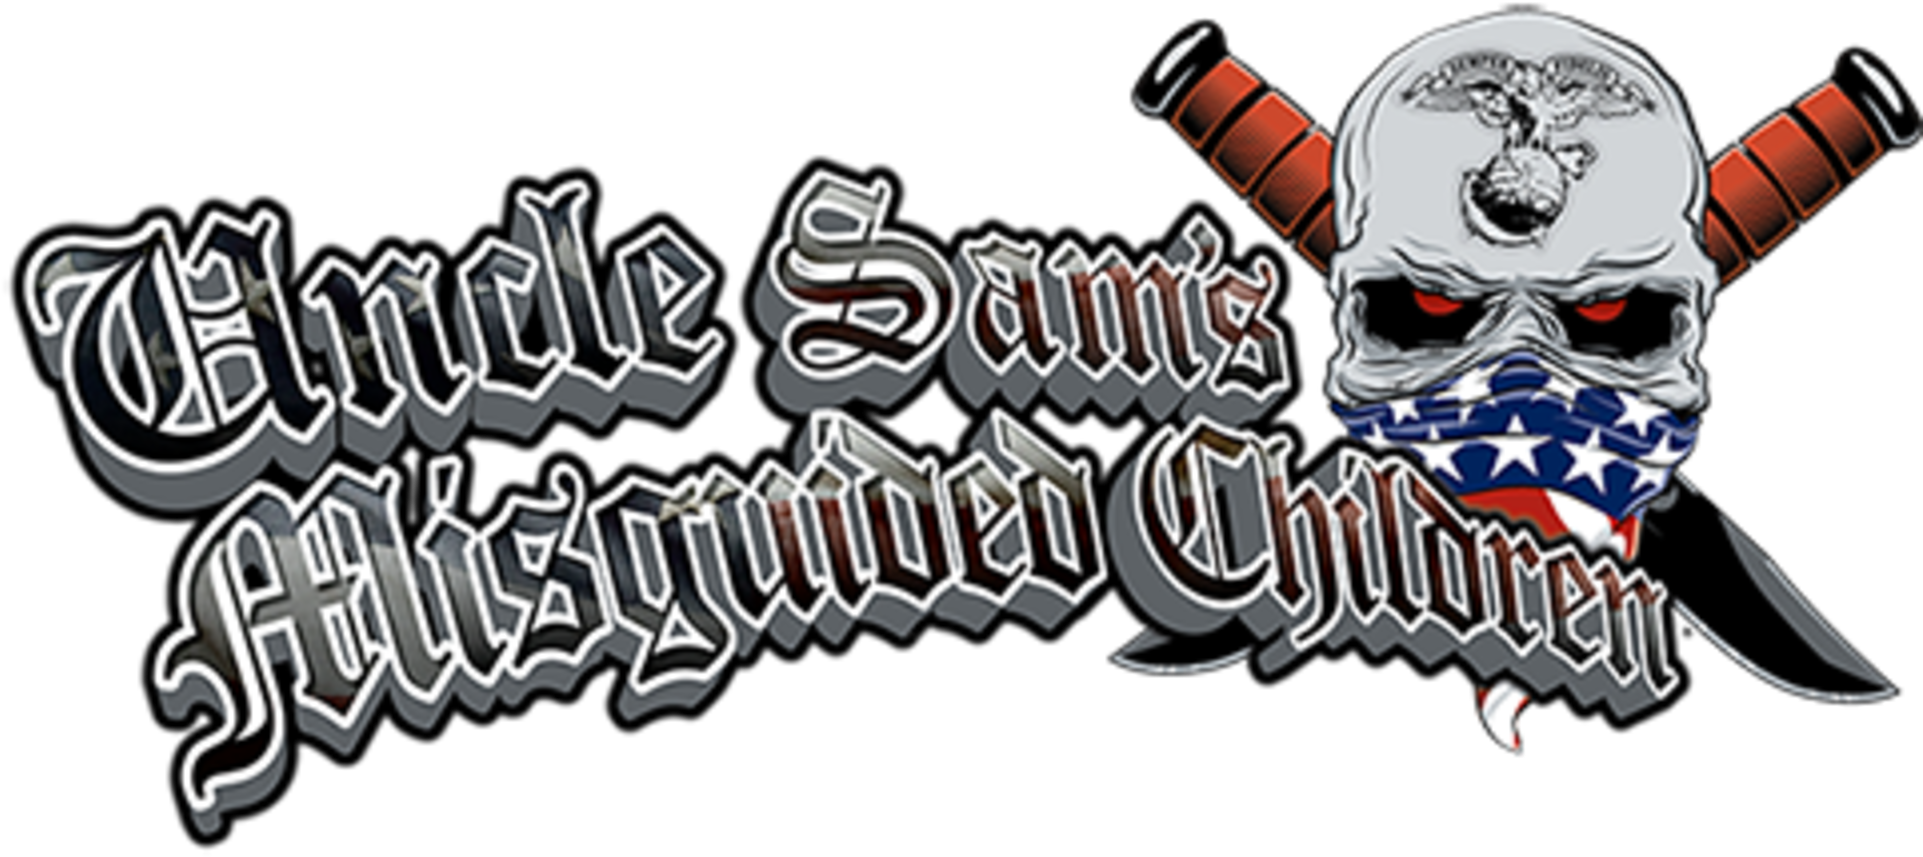 A Logo With A Skull And Sword